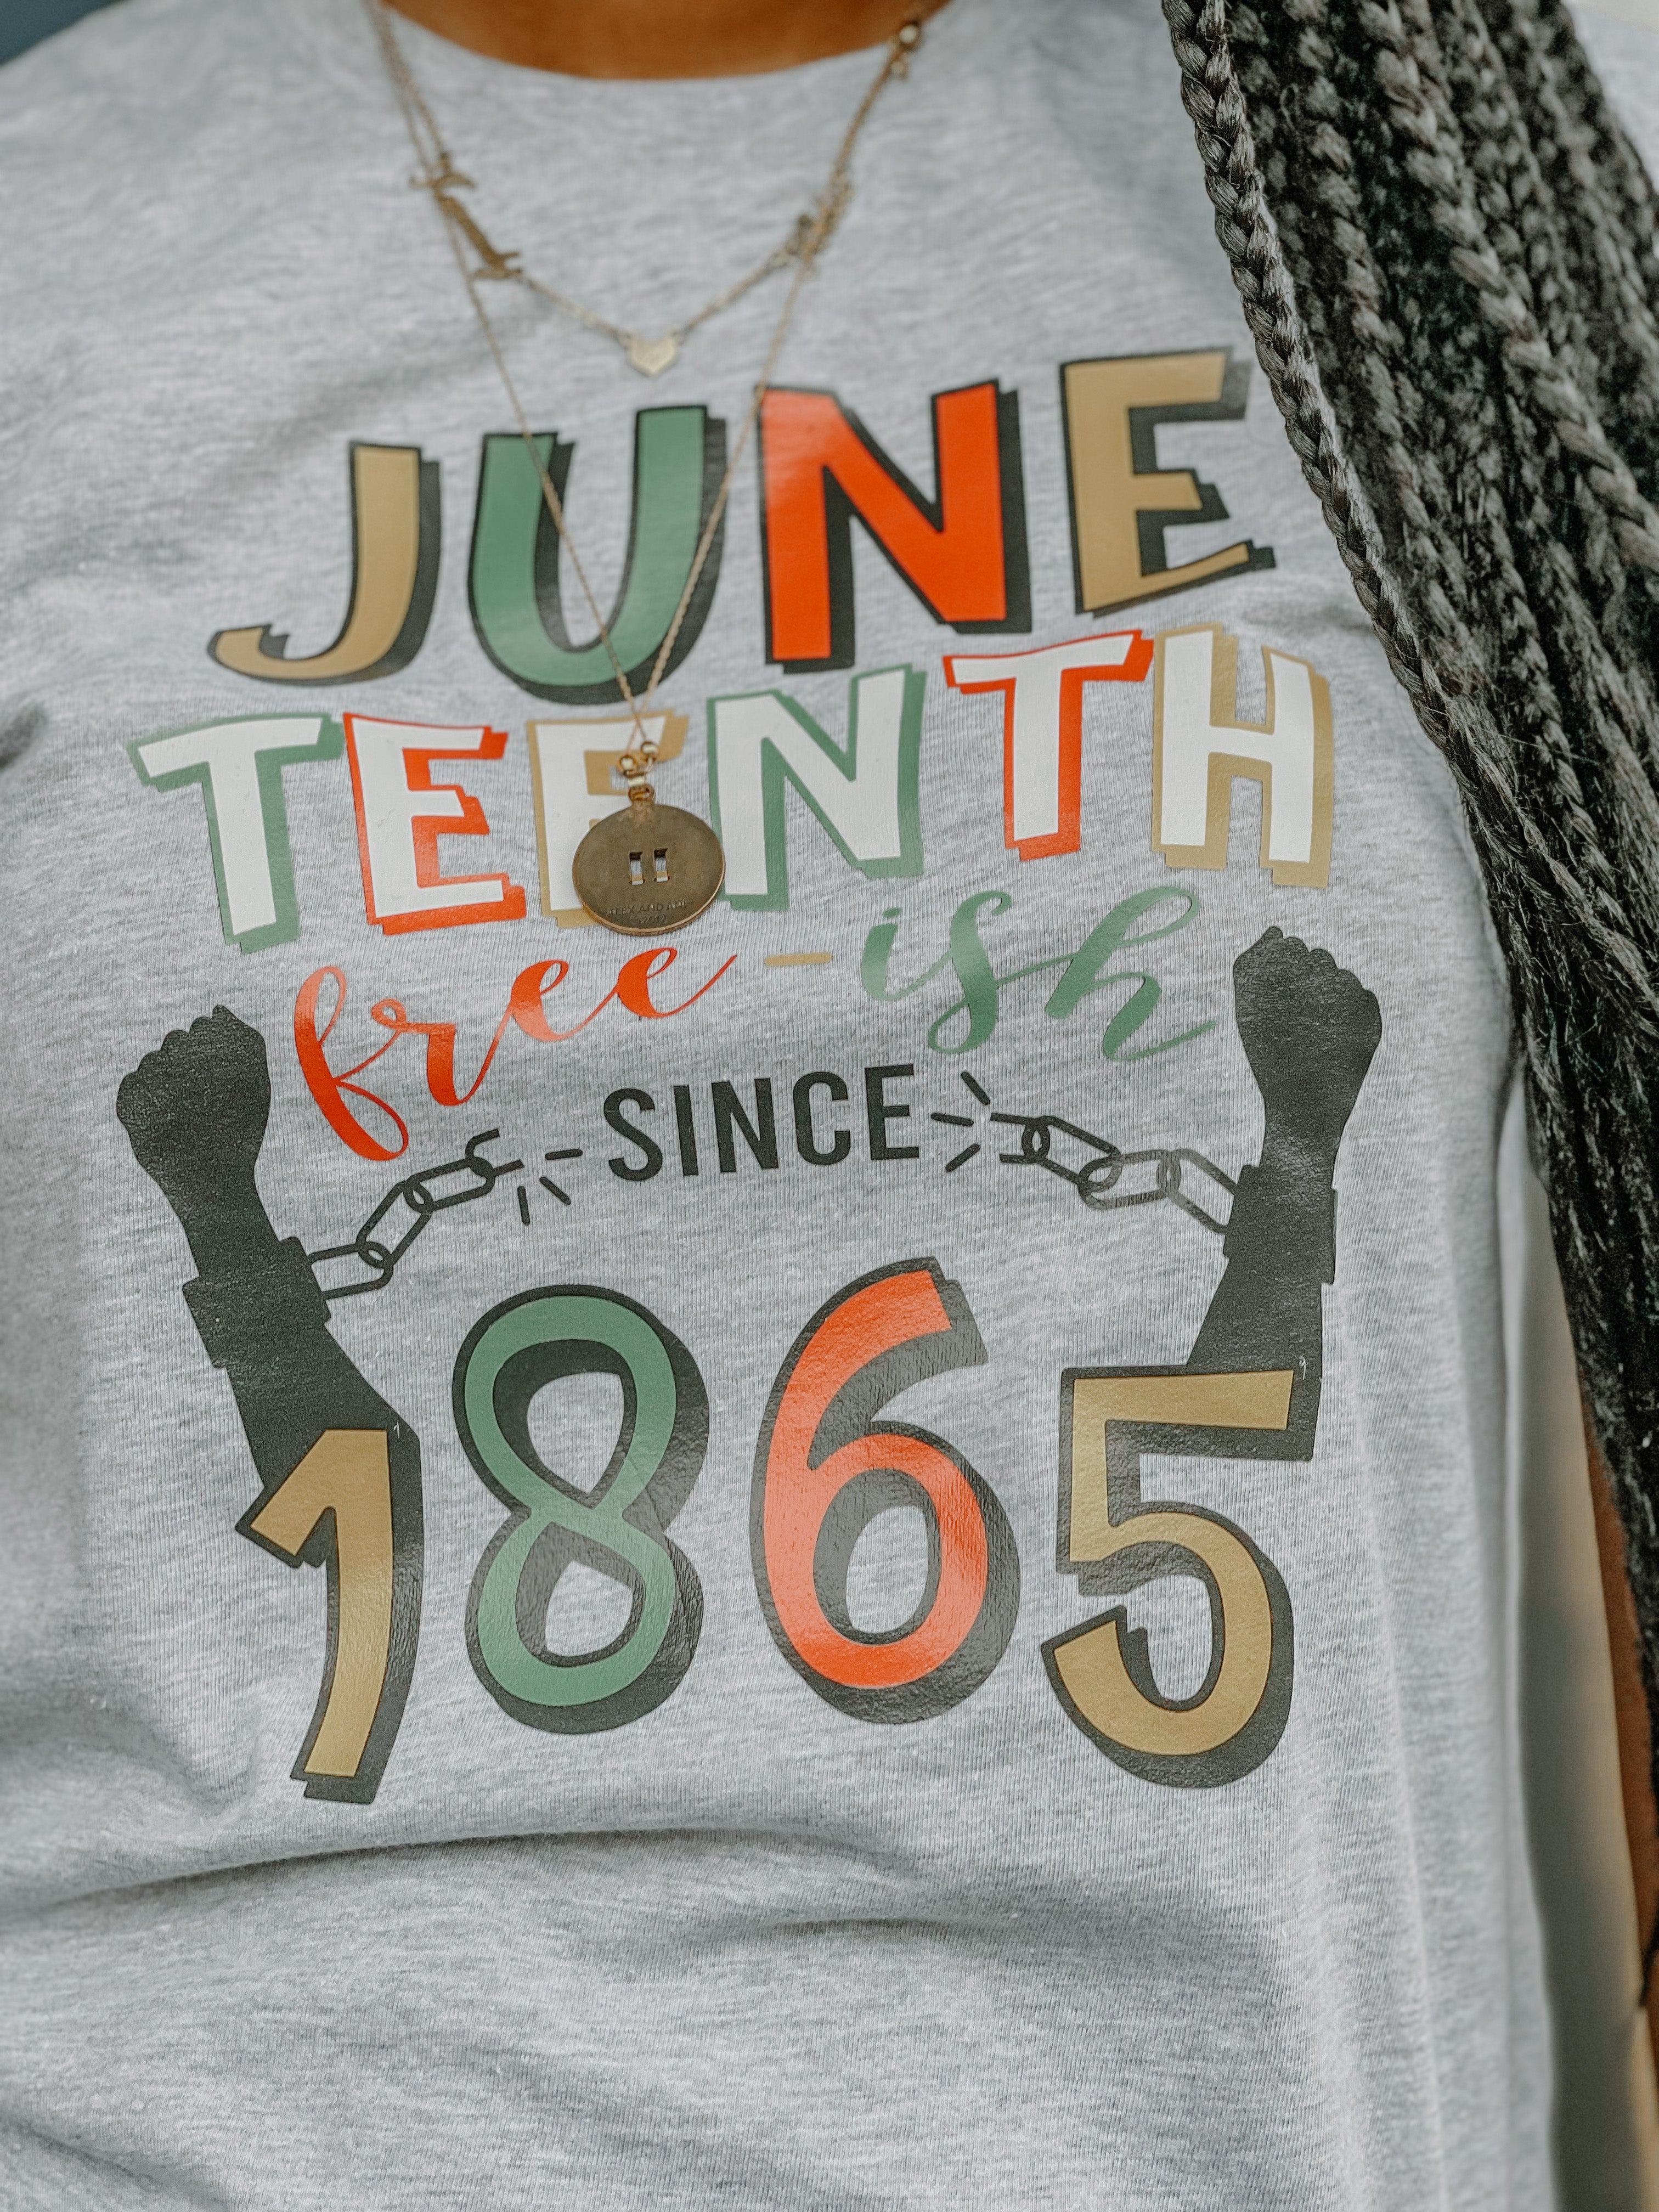 Free-ish Since 1865 Freedom Day Juneteenth Shirt - Athletic Gray